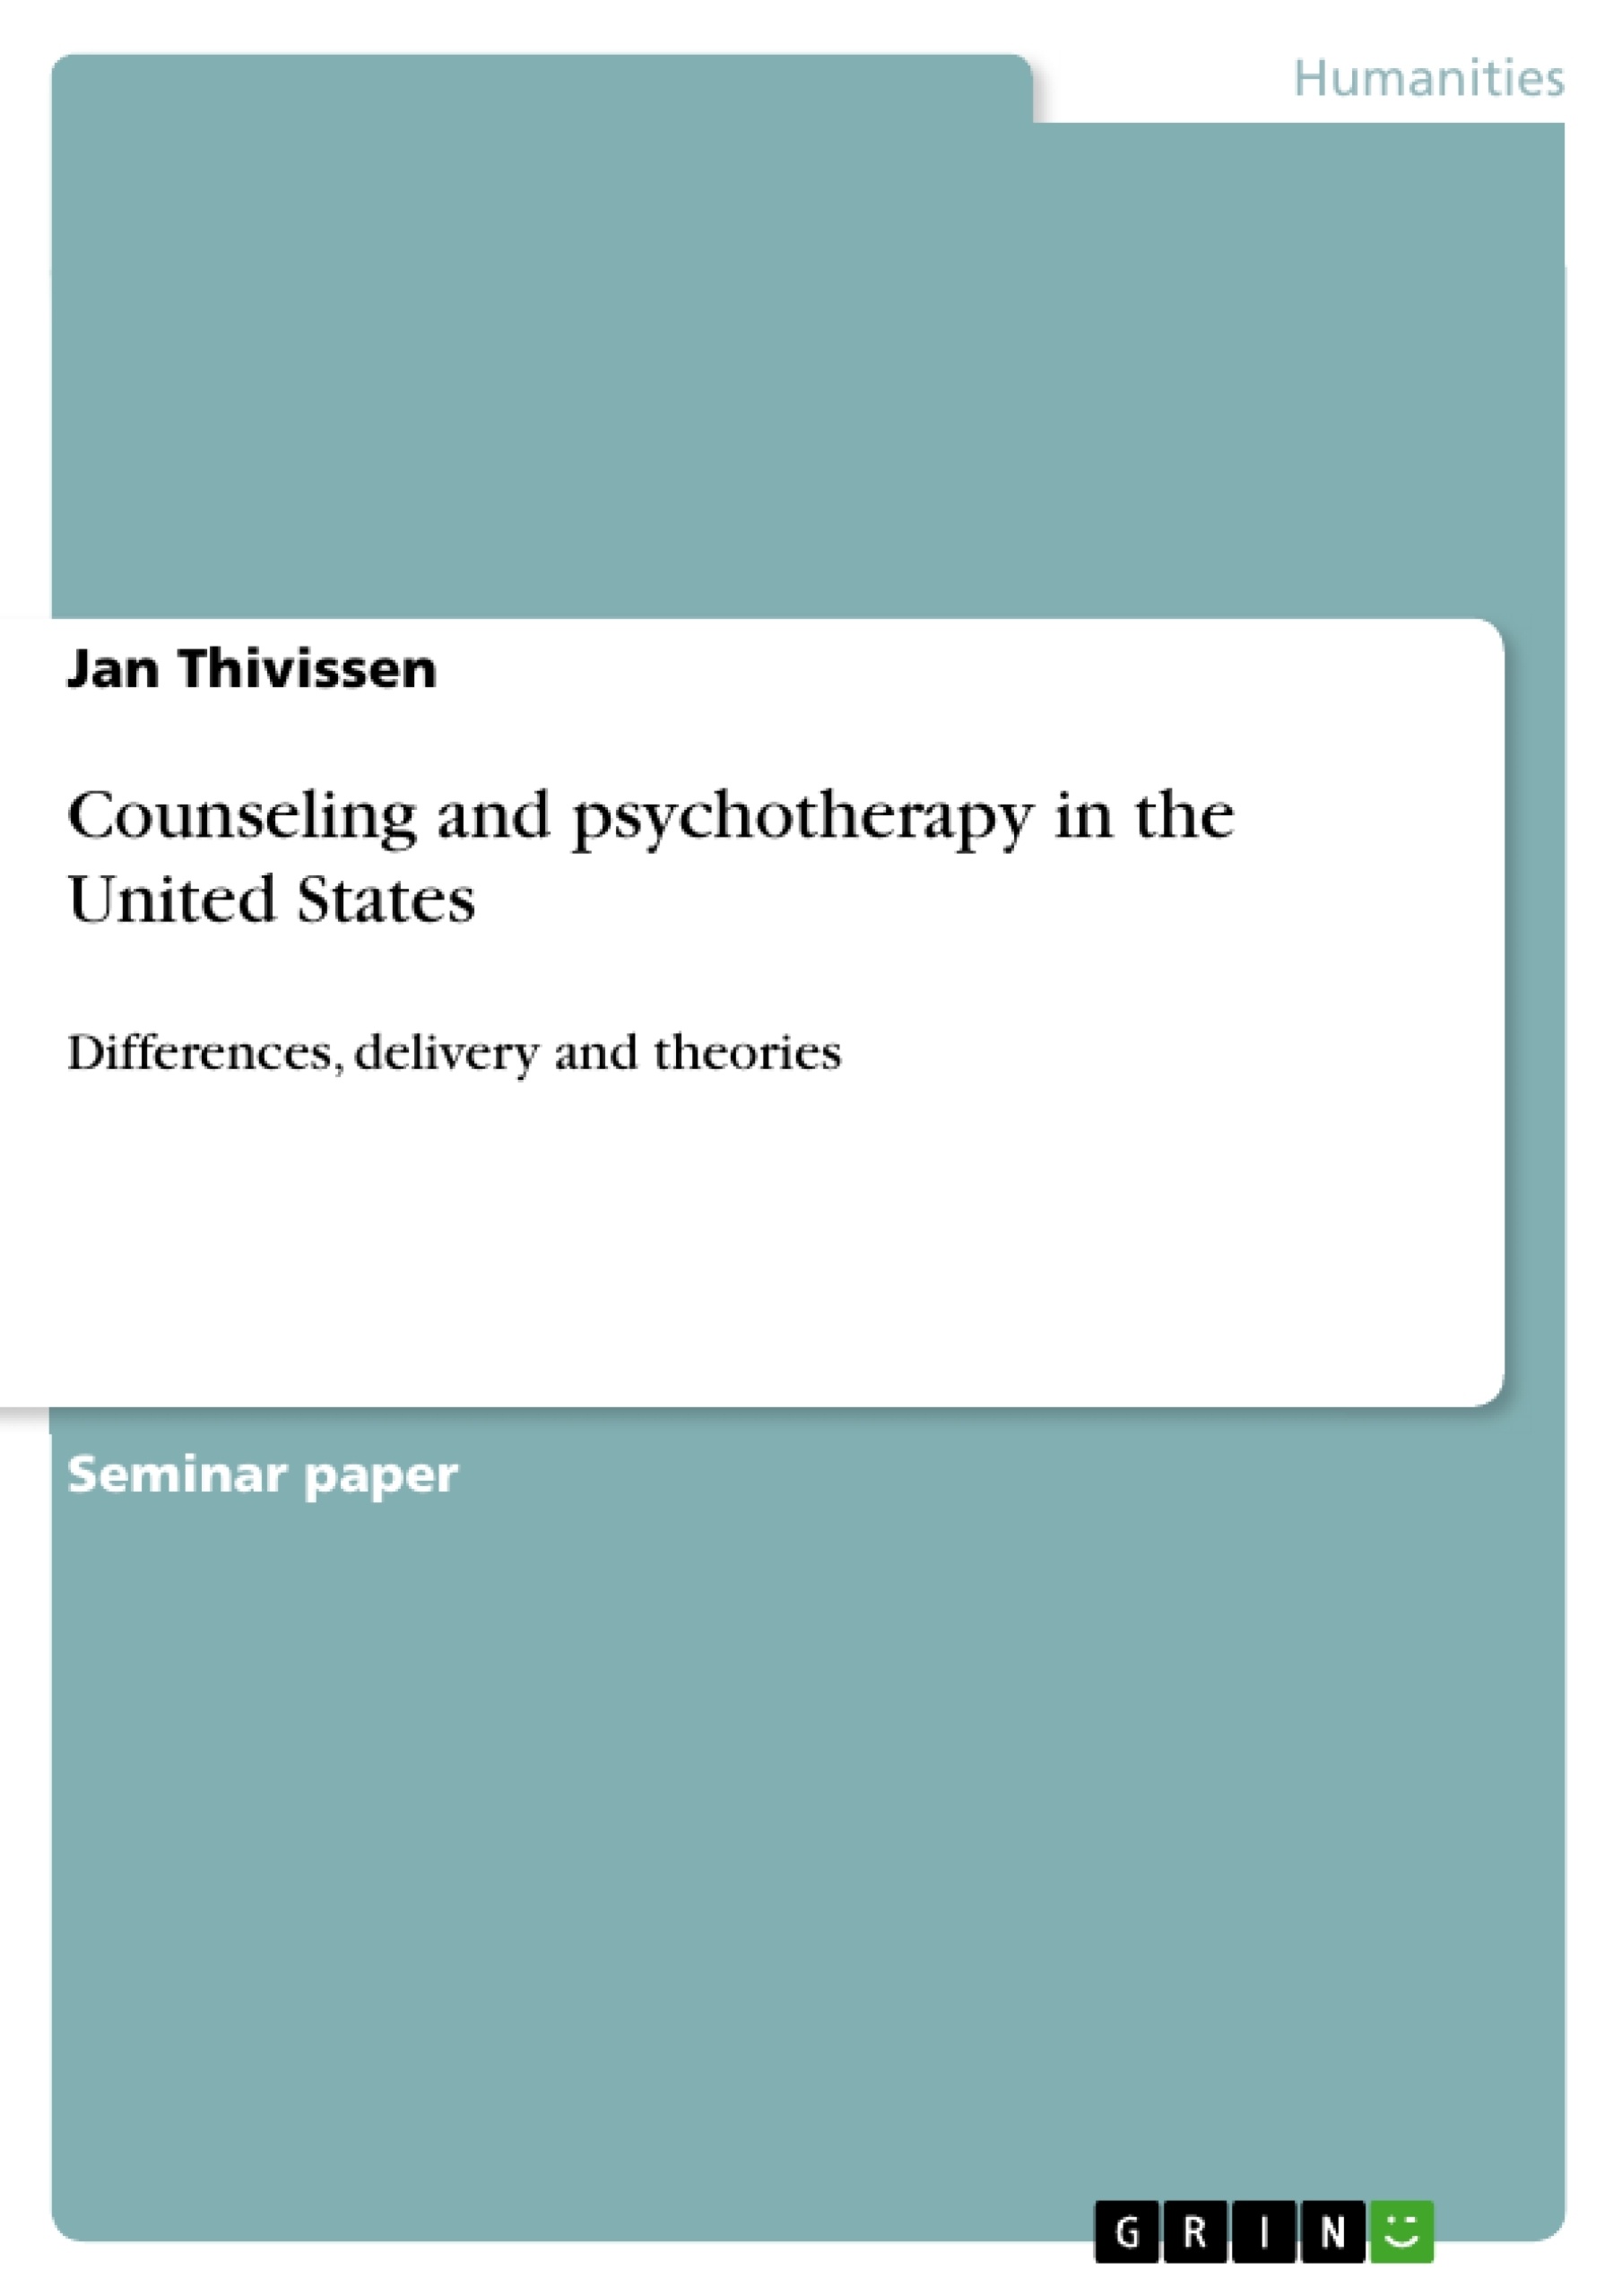 Título: Counseling and psychotherapy in the United States